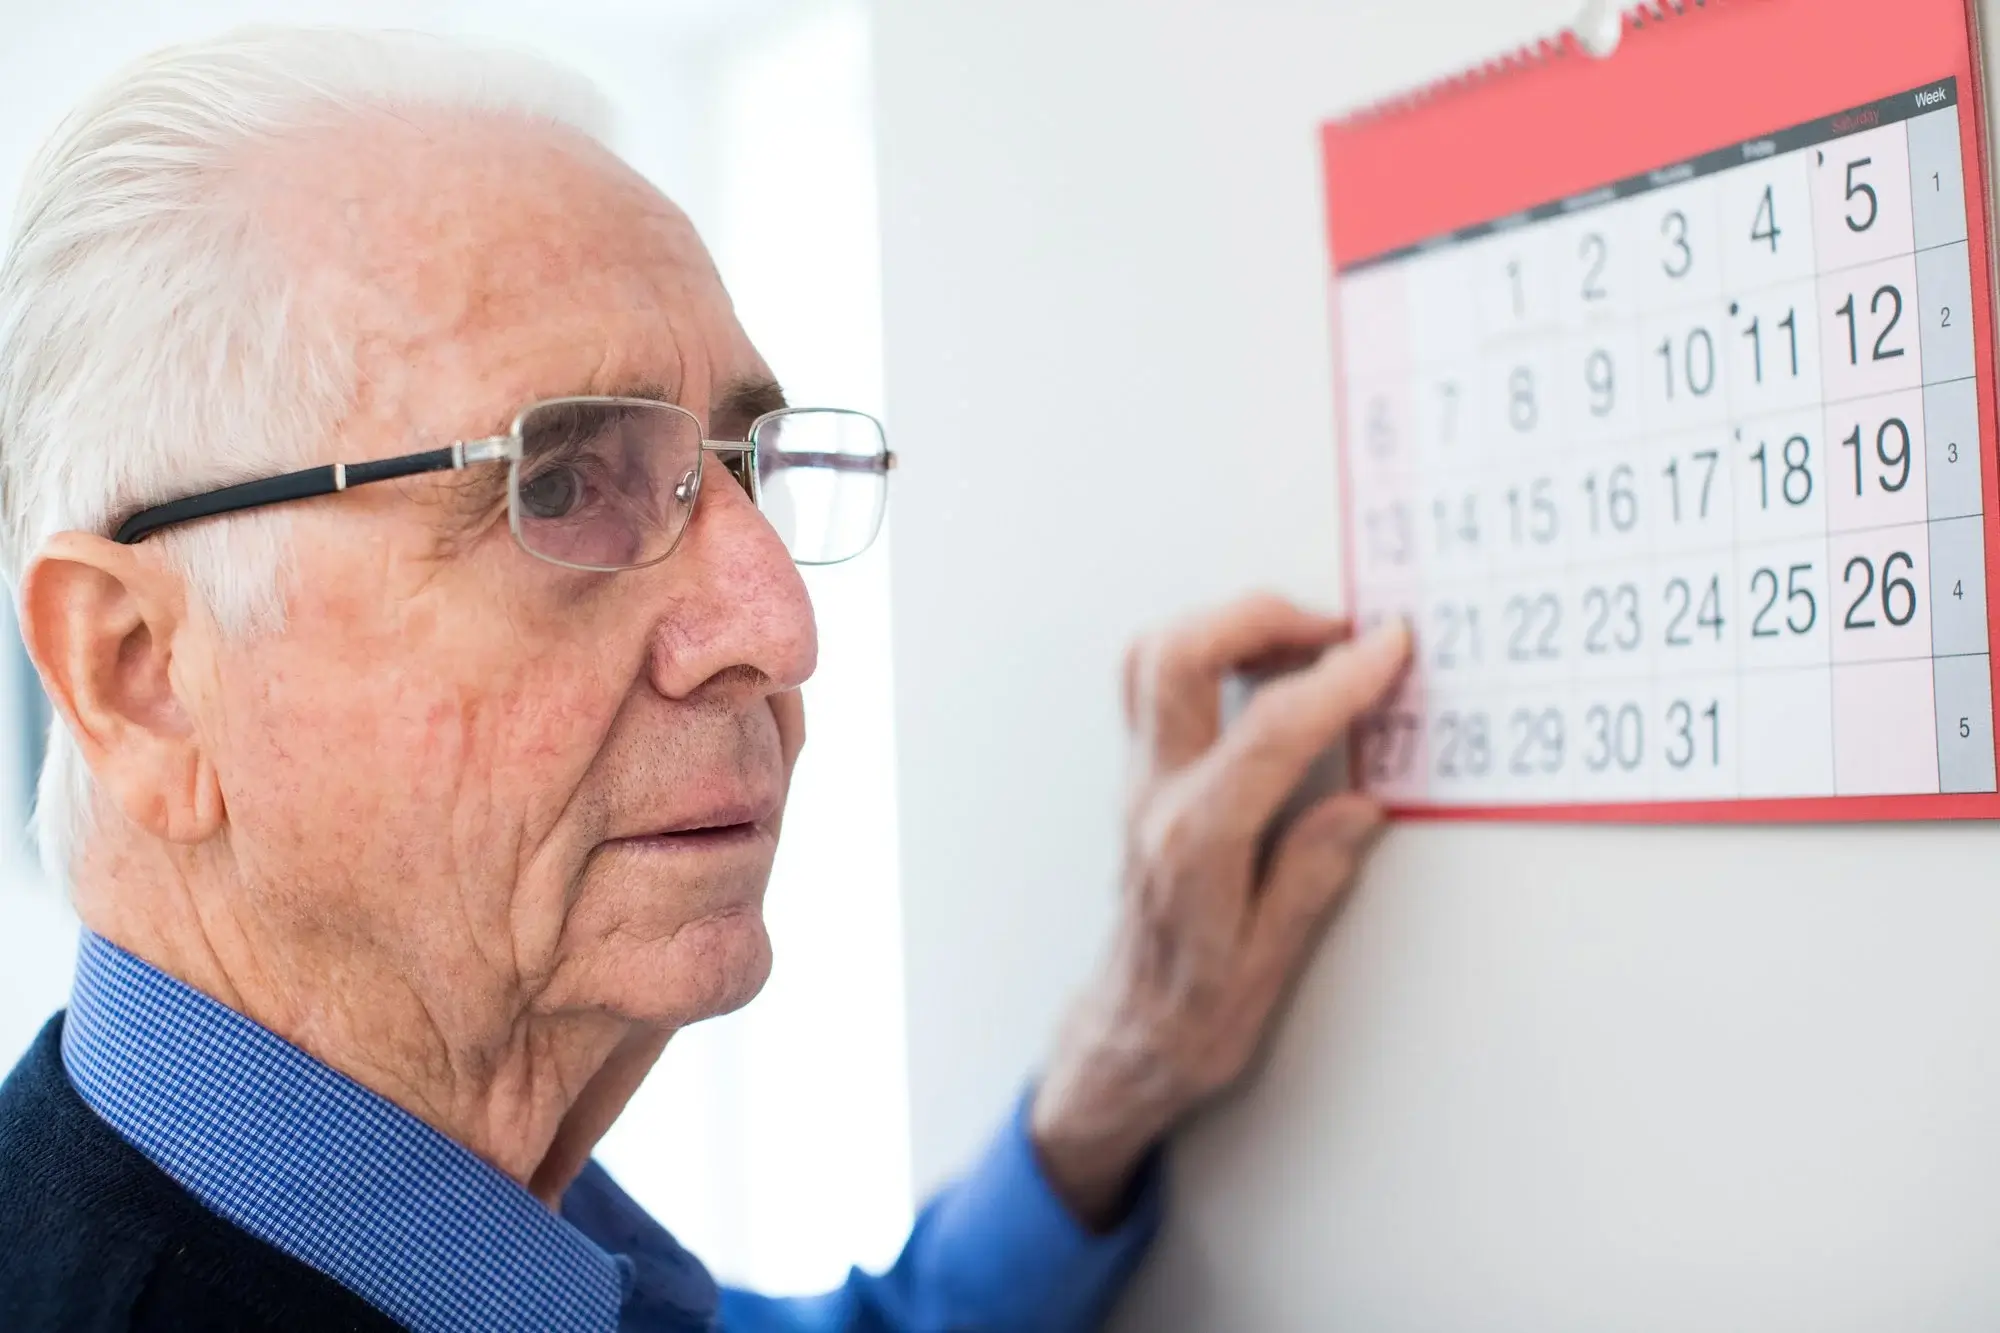 How long can a person with dementia live at home